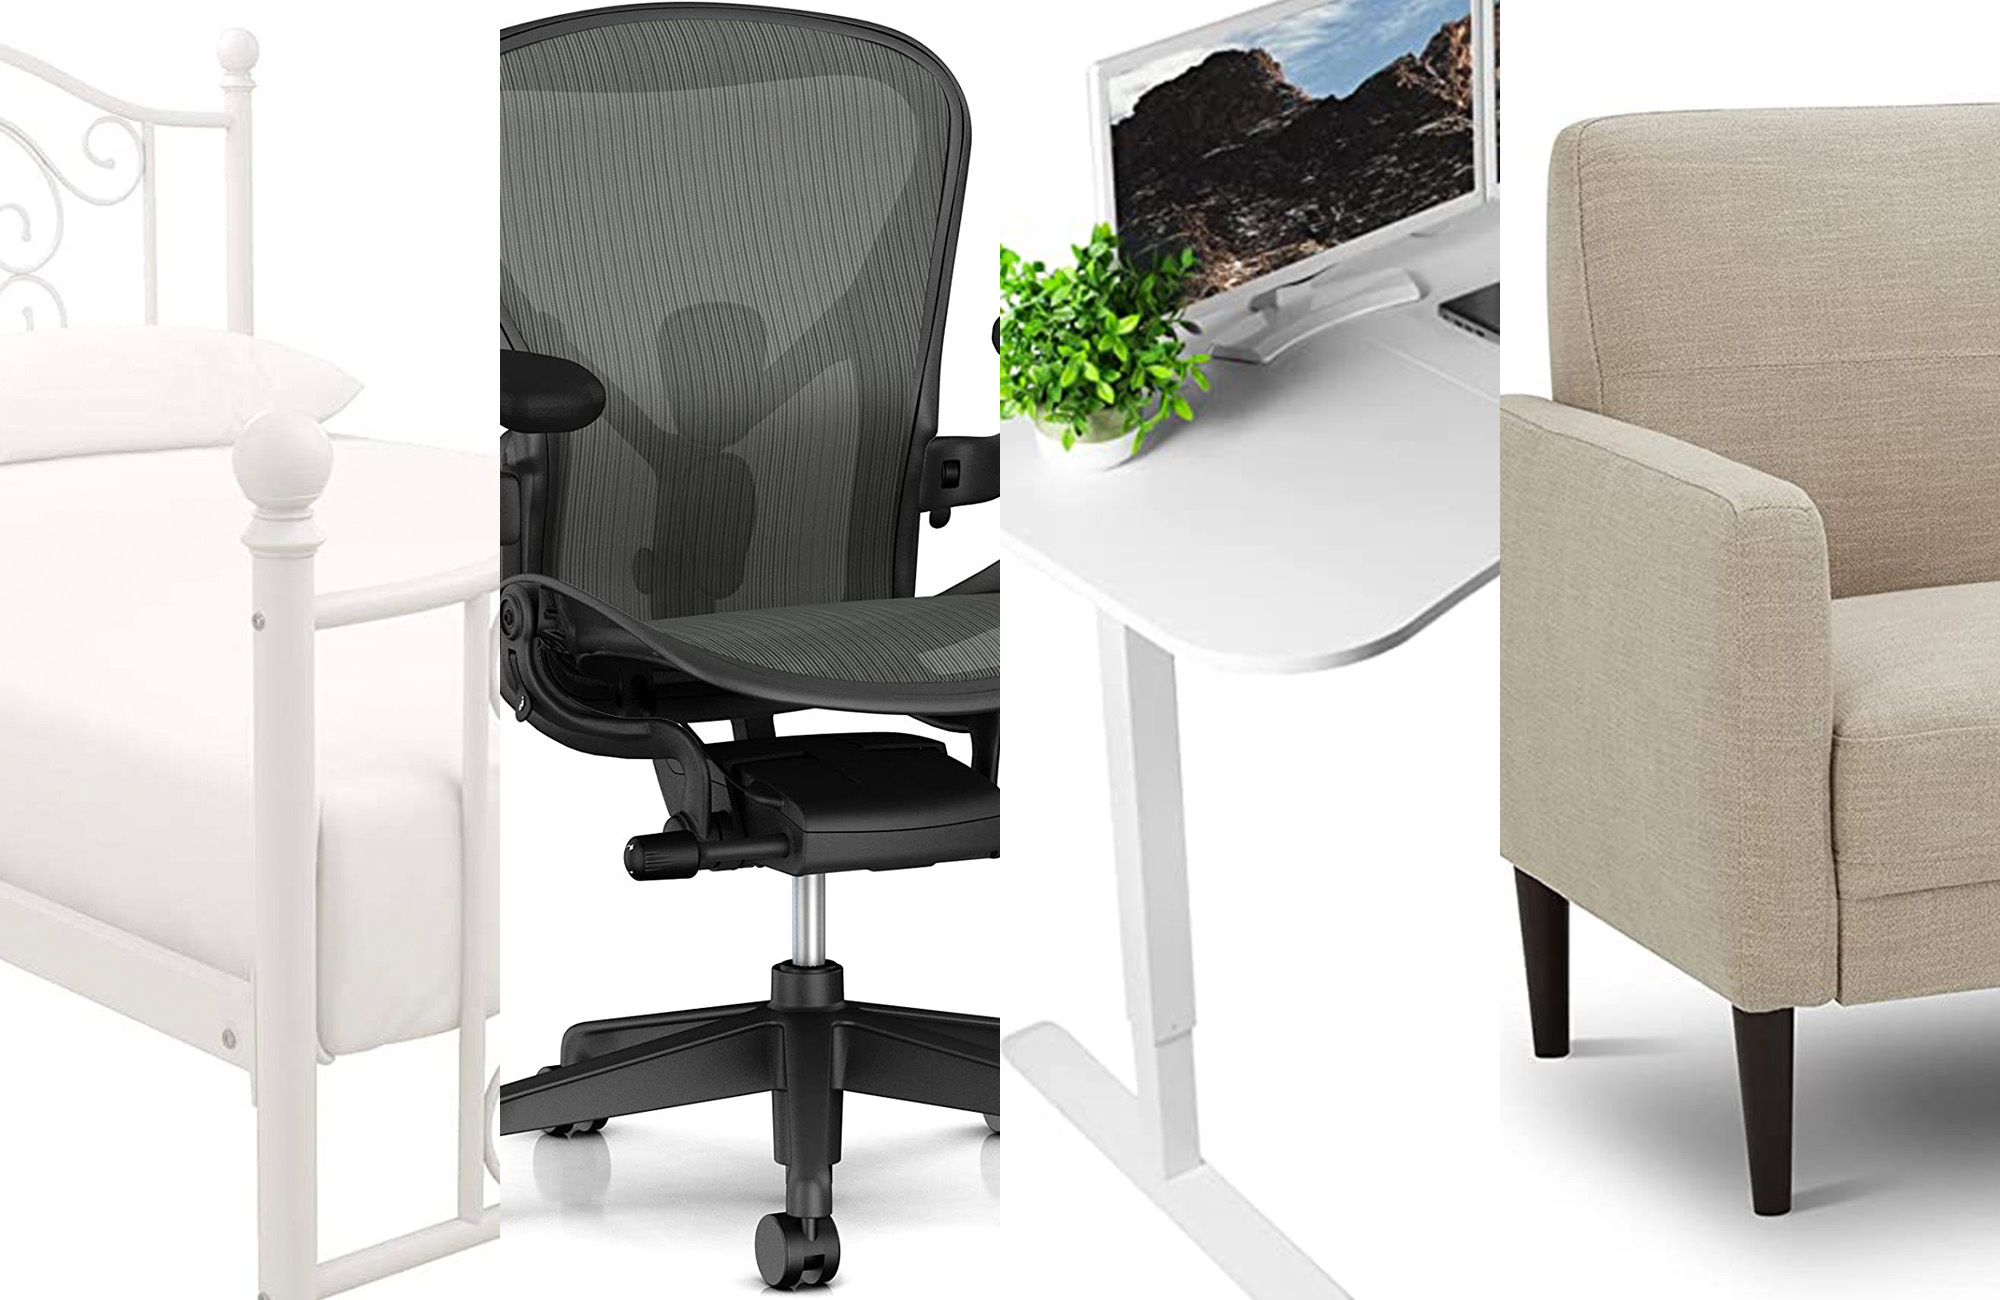 Upgrade your office or living room with these Presidents Day furniture deals